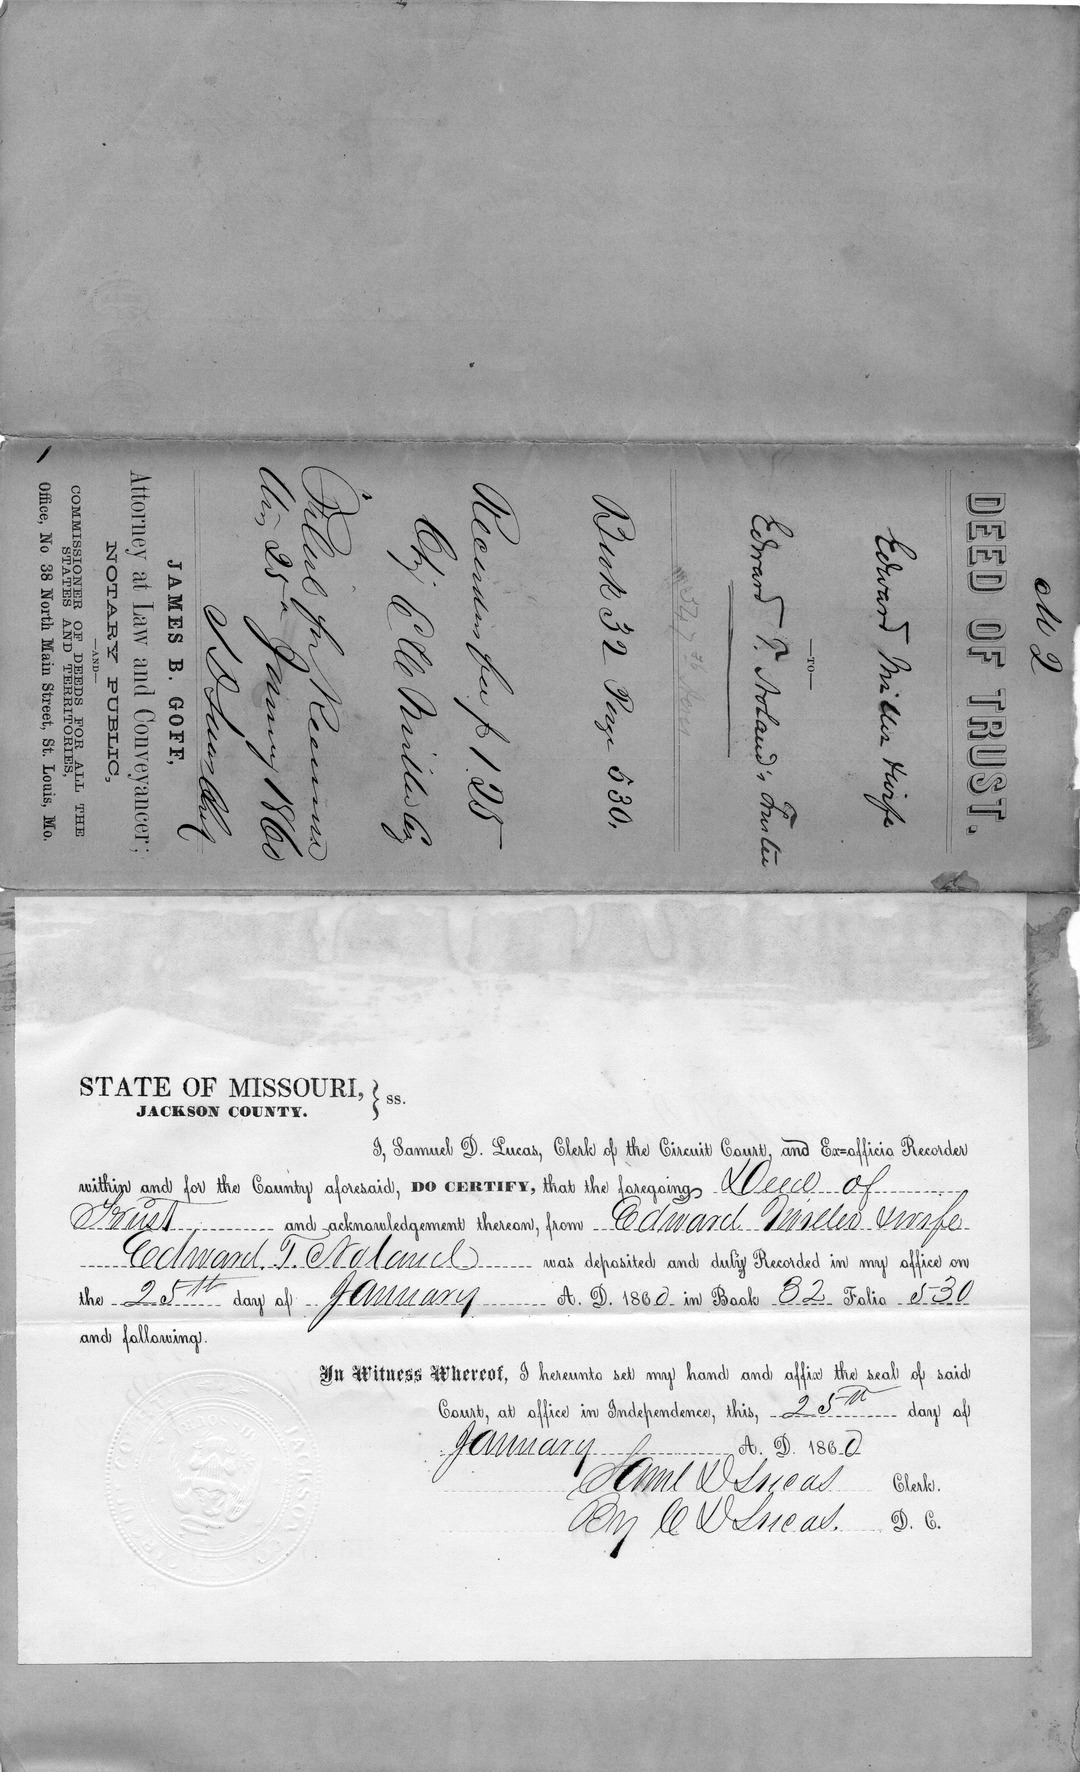 Deed of Trust from Edward Miller and Wife to Edward T. Noland